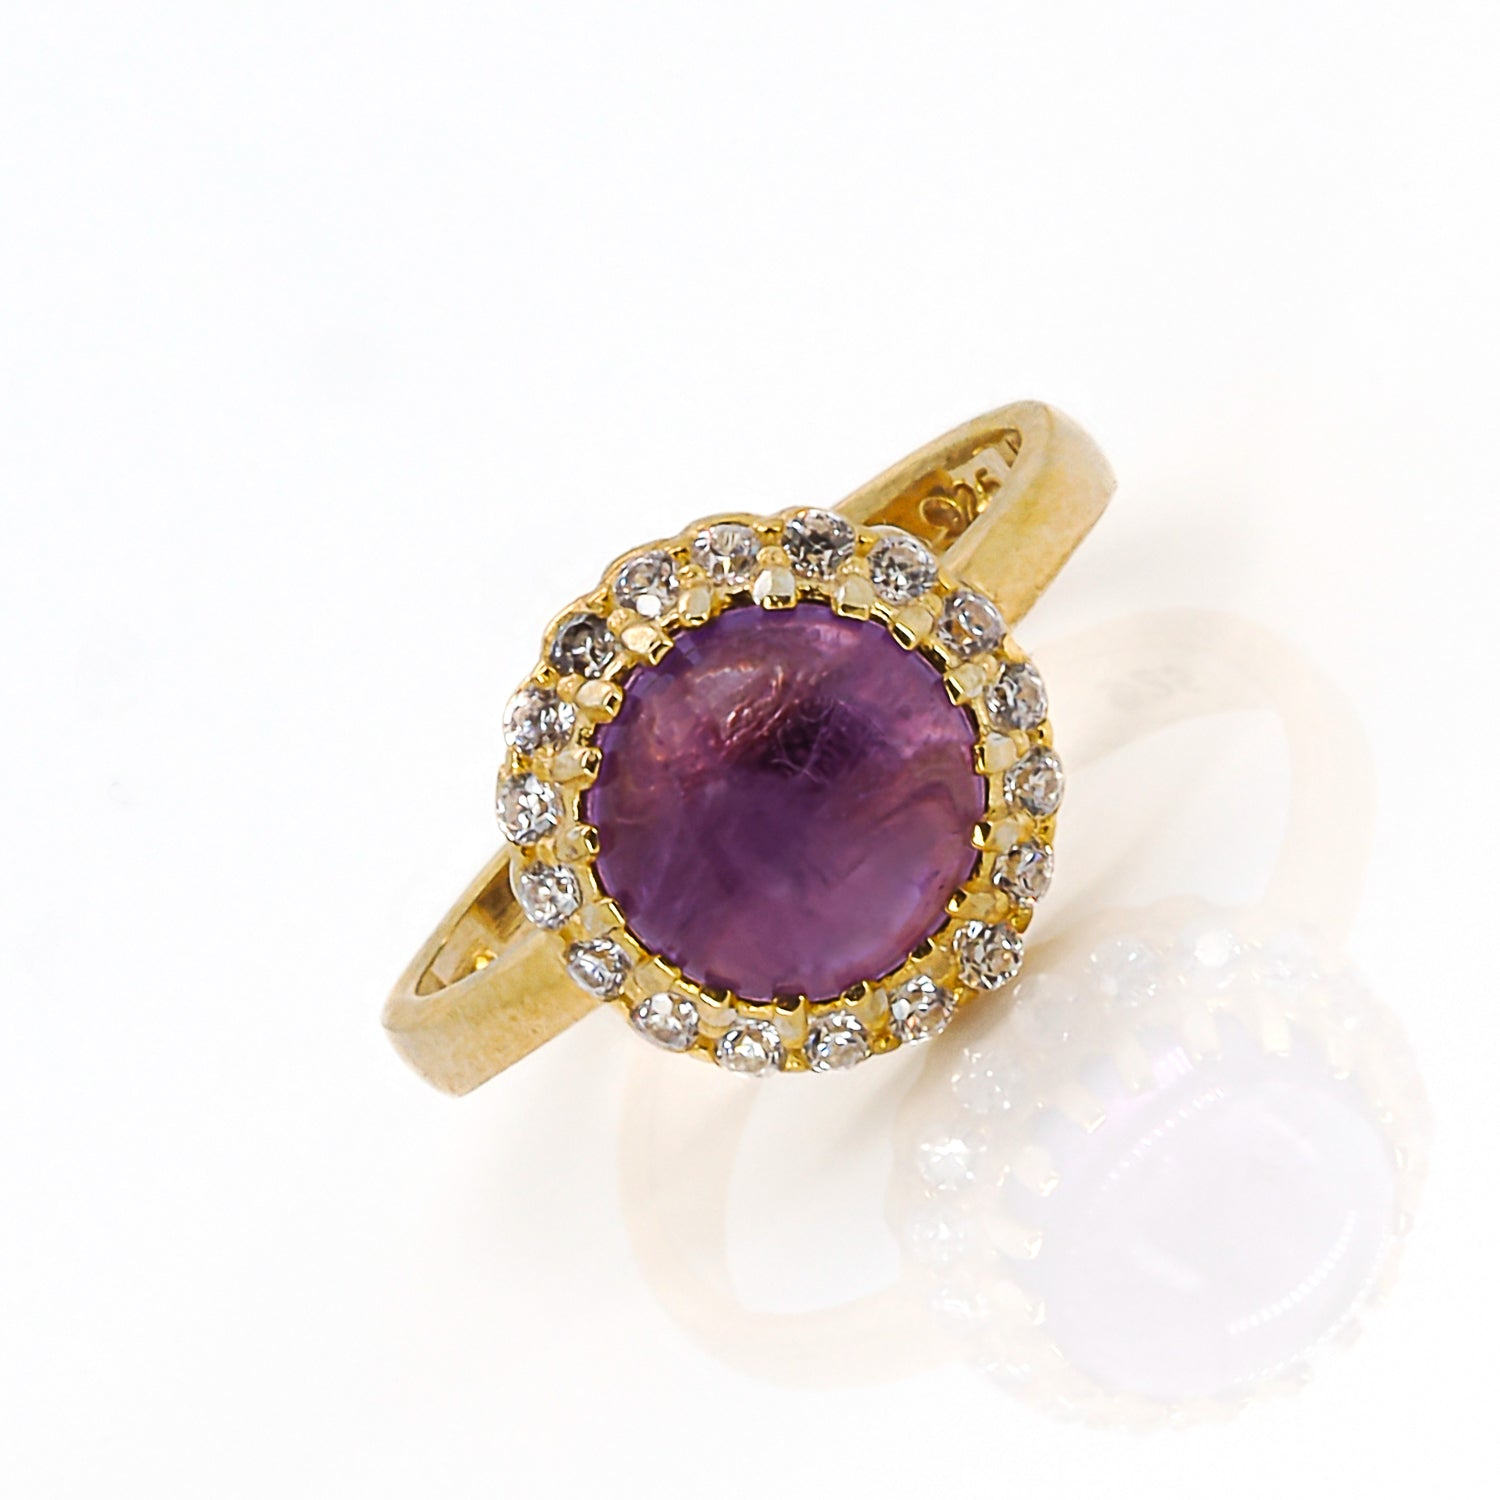 Amethyst Gemstone Ring in Sterling Silver and Gold - A Talisman of Emotional Balance.